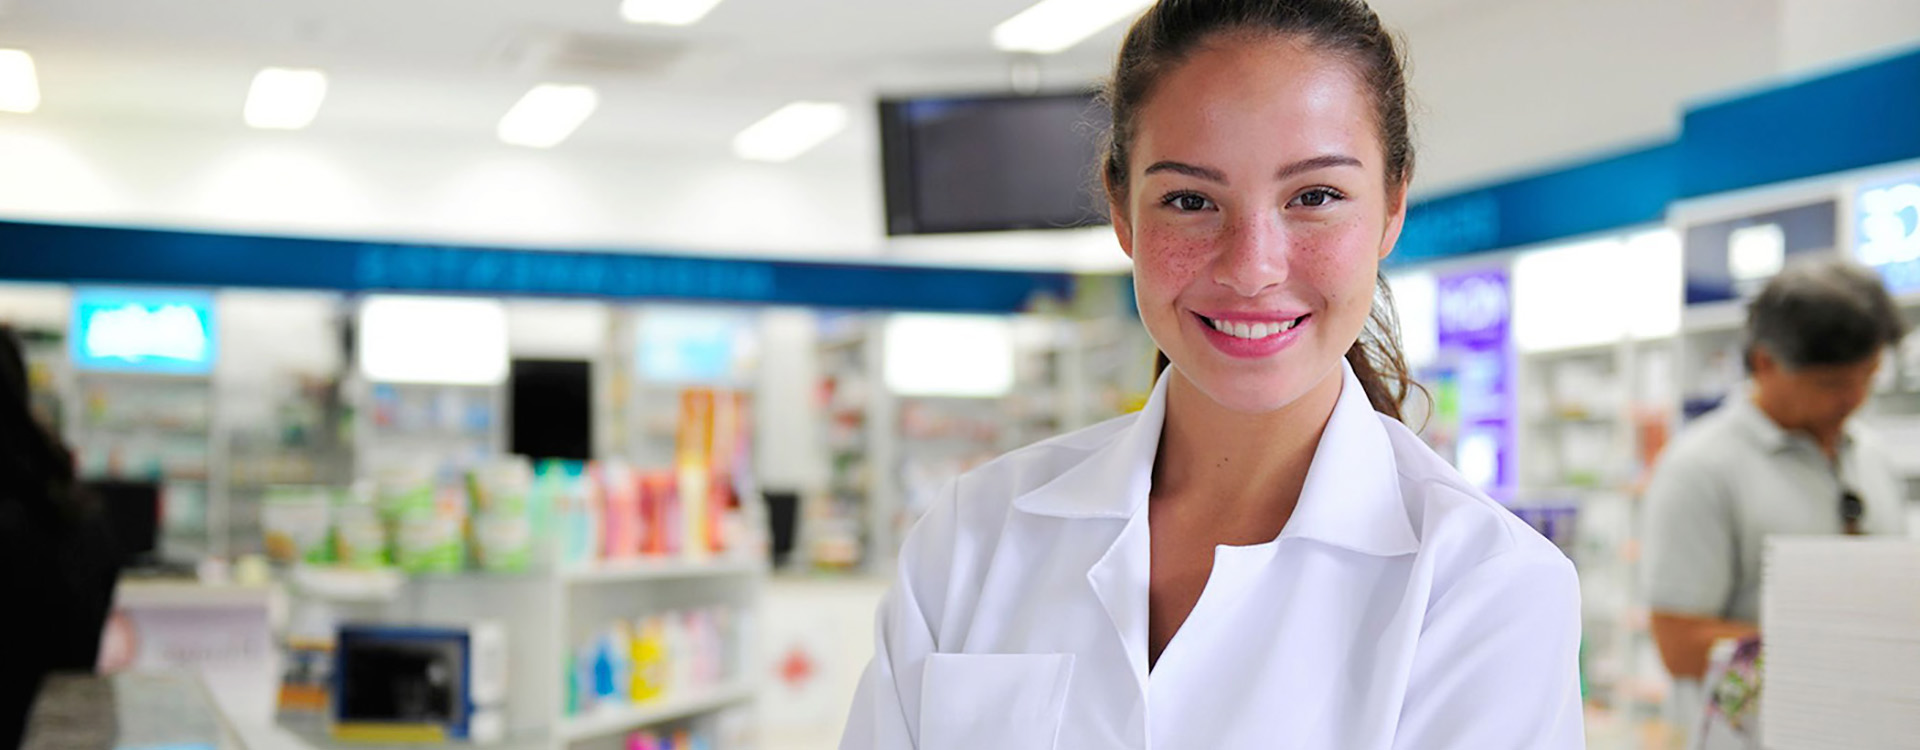 Pharmacy Technician at the drug store